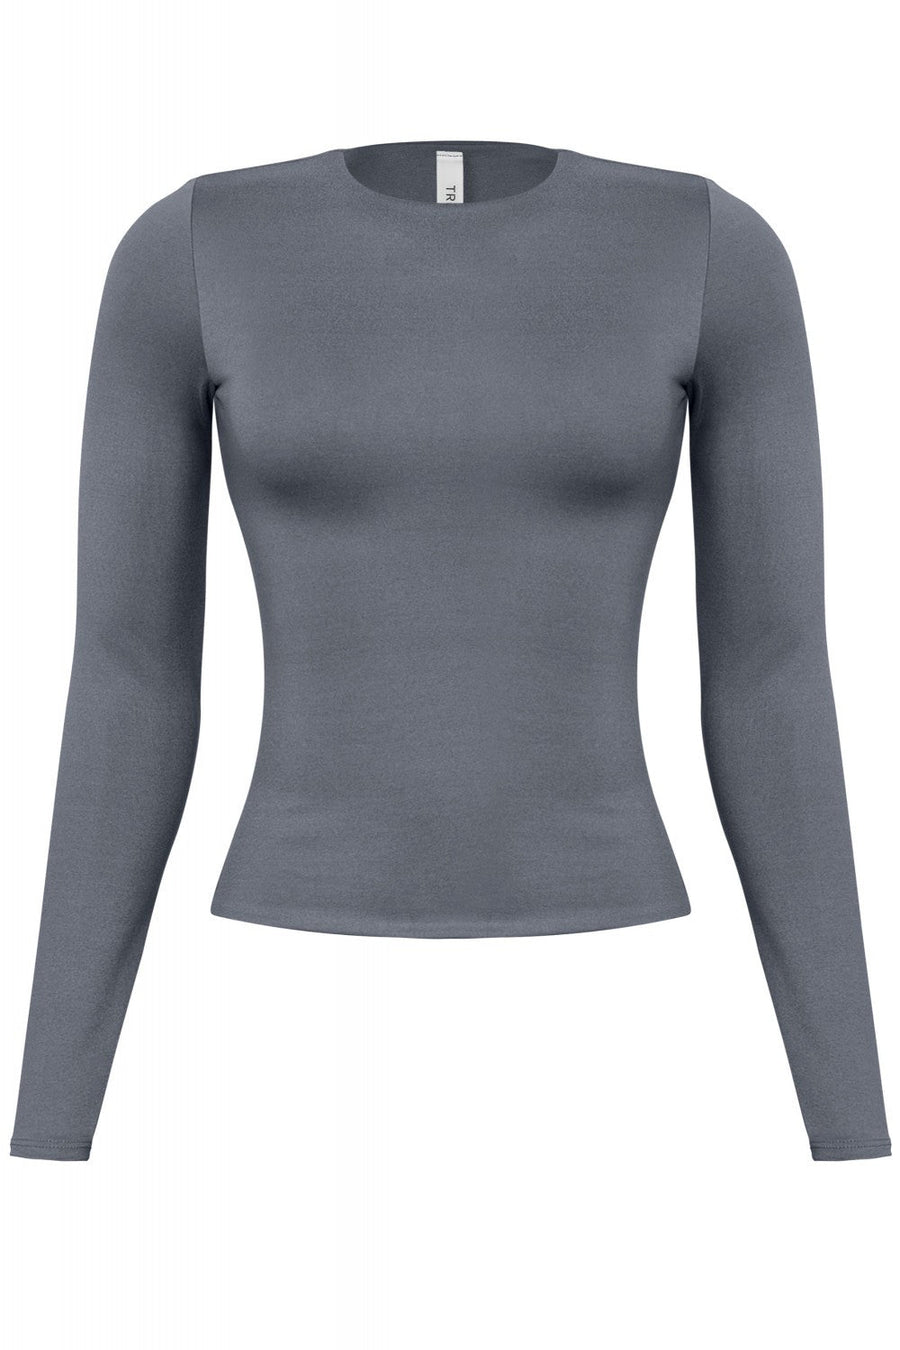 Second Skin Round Neck Long Sleeve Top - The Active Avenue